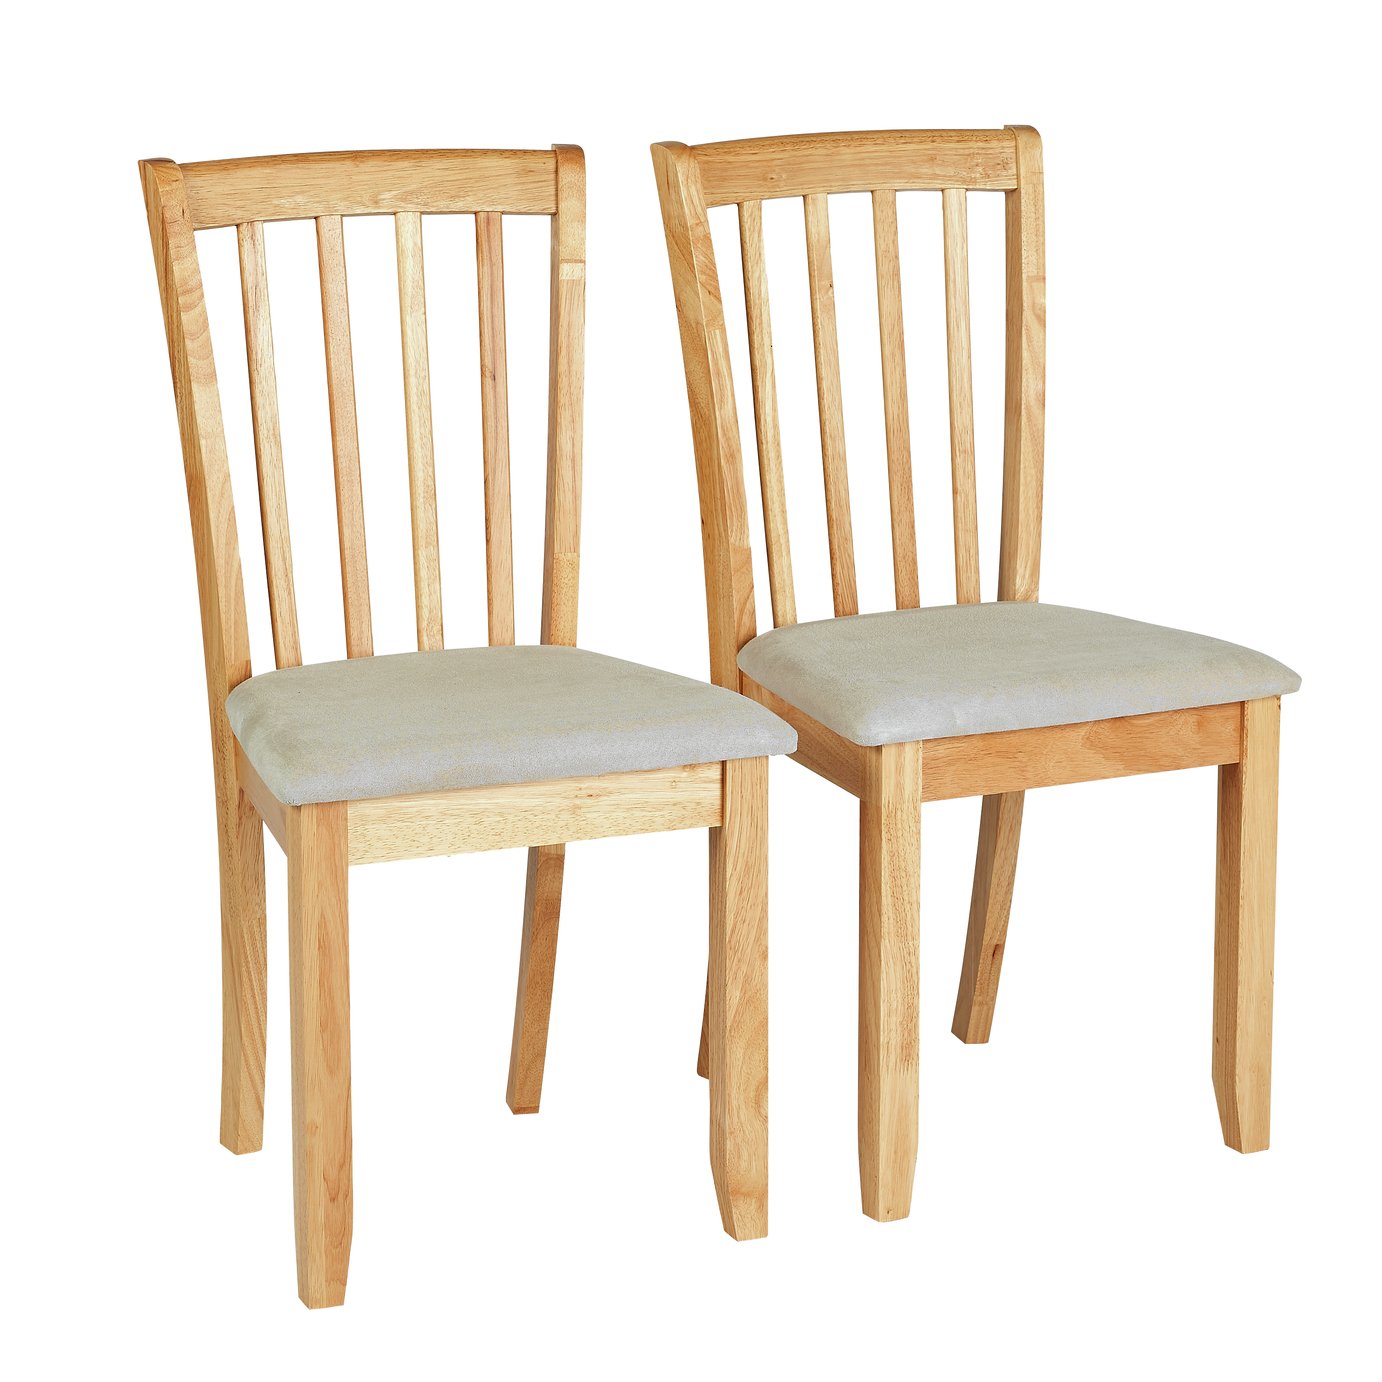 Argos Home Banbury Pair of Solid Wood Dining Chairs- Natural